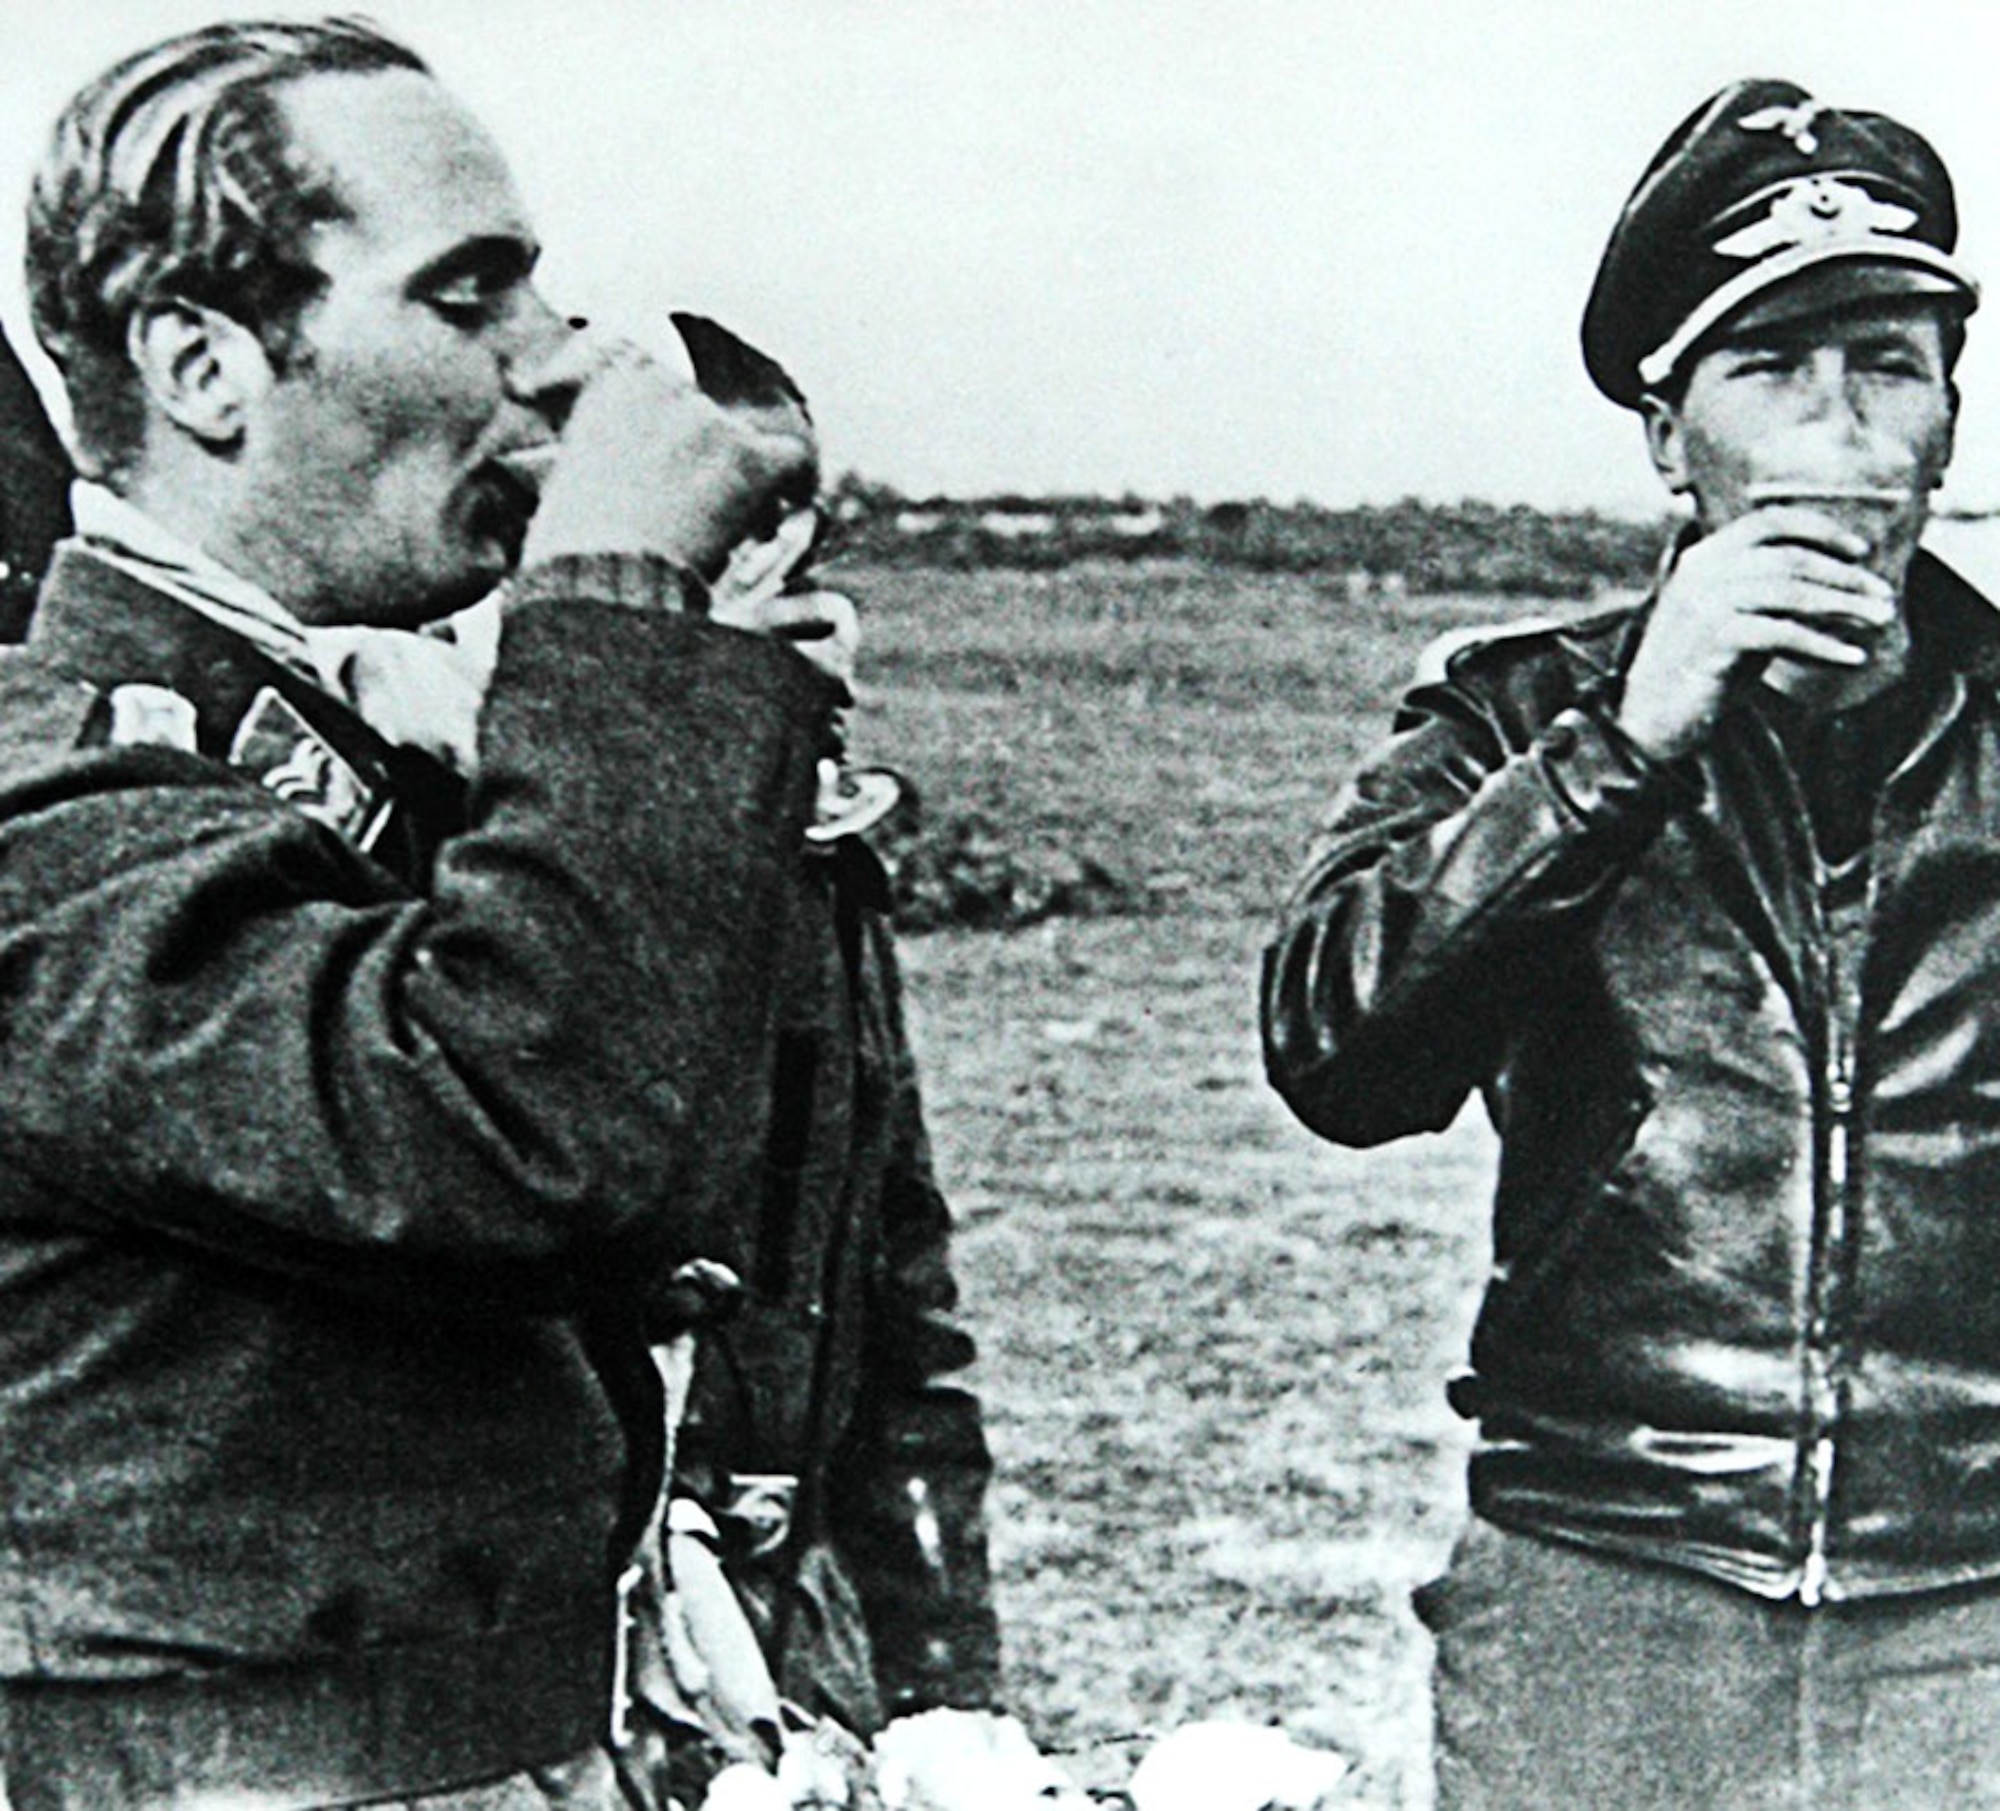 Many Luftwaffe fighter pilots wore privately purchased, black leather flying jackets. (U.S. Air Force photo)